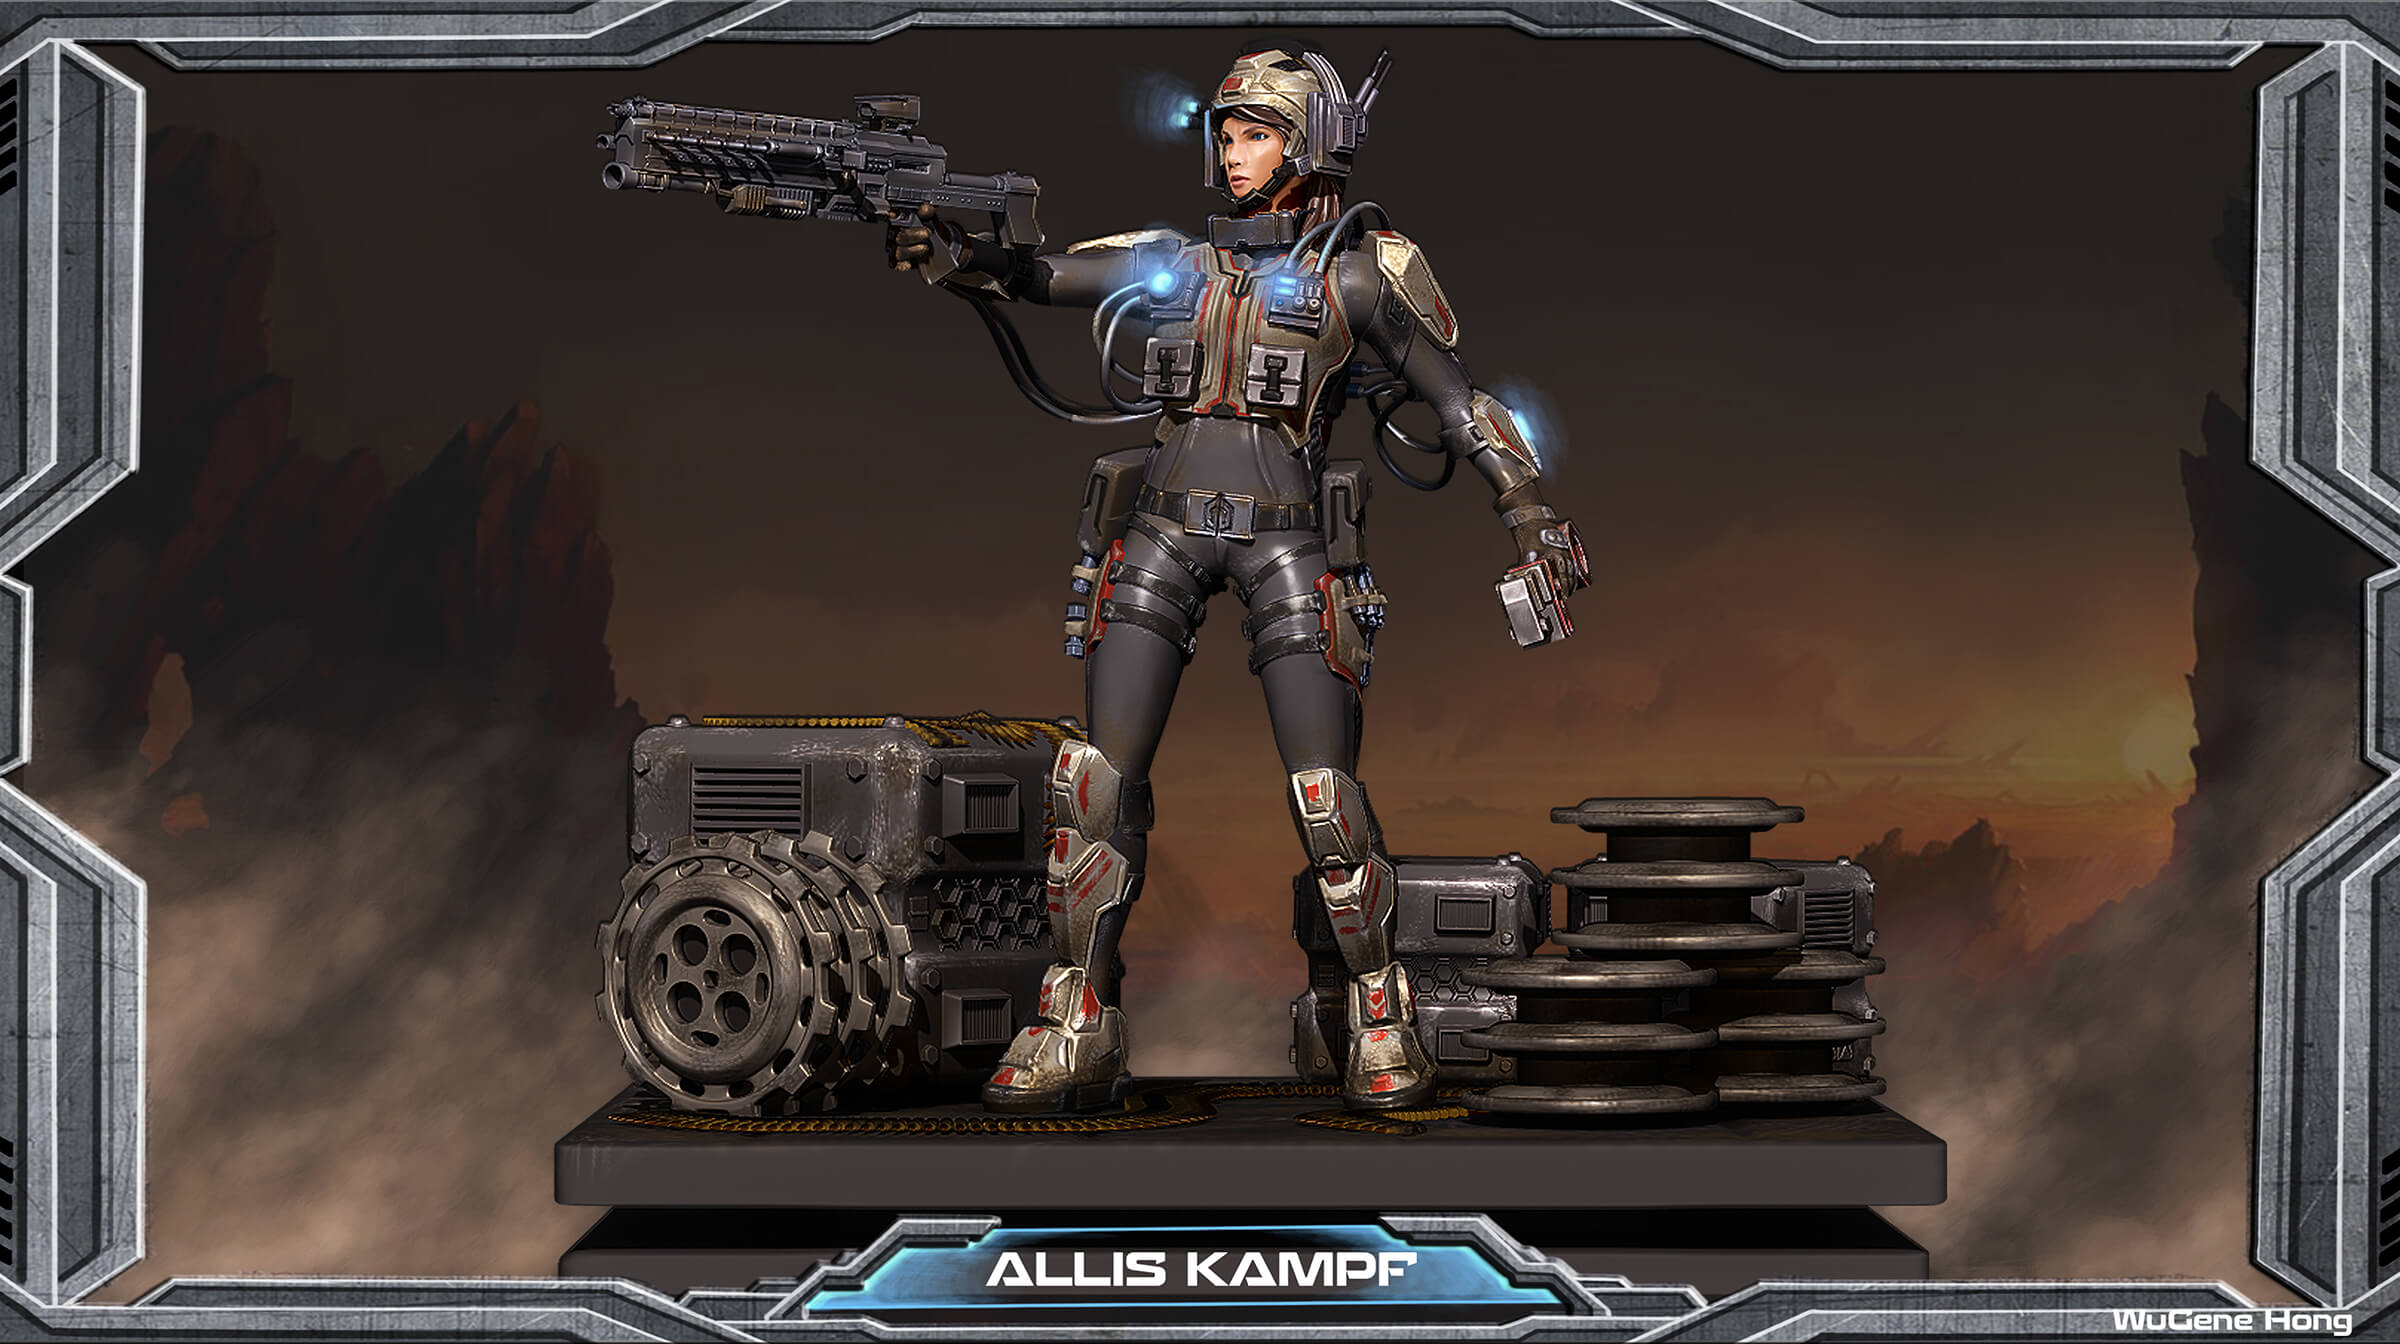 computer-generated 3D model of a character named allis kampf in an armored suit carrying a large gun